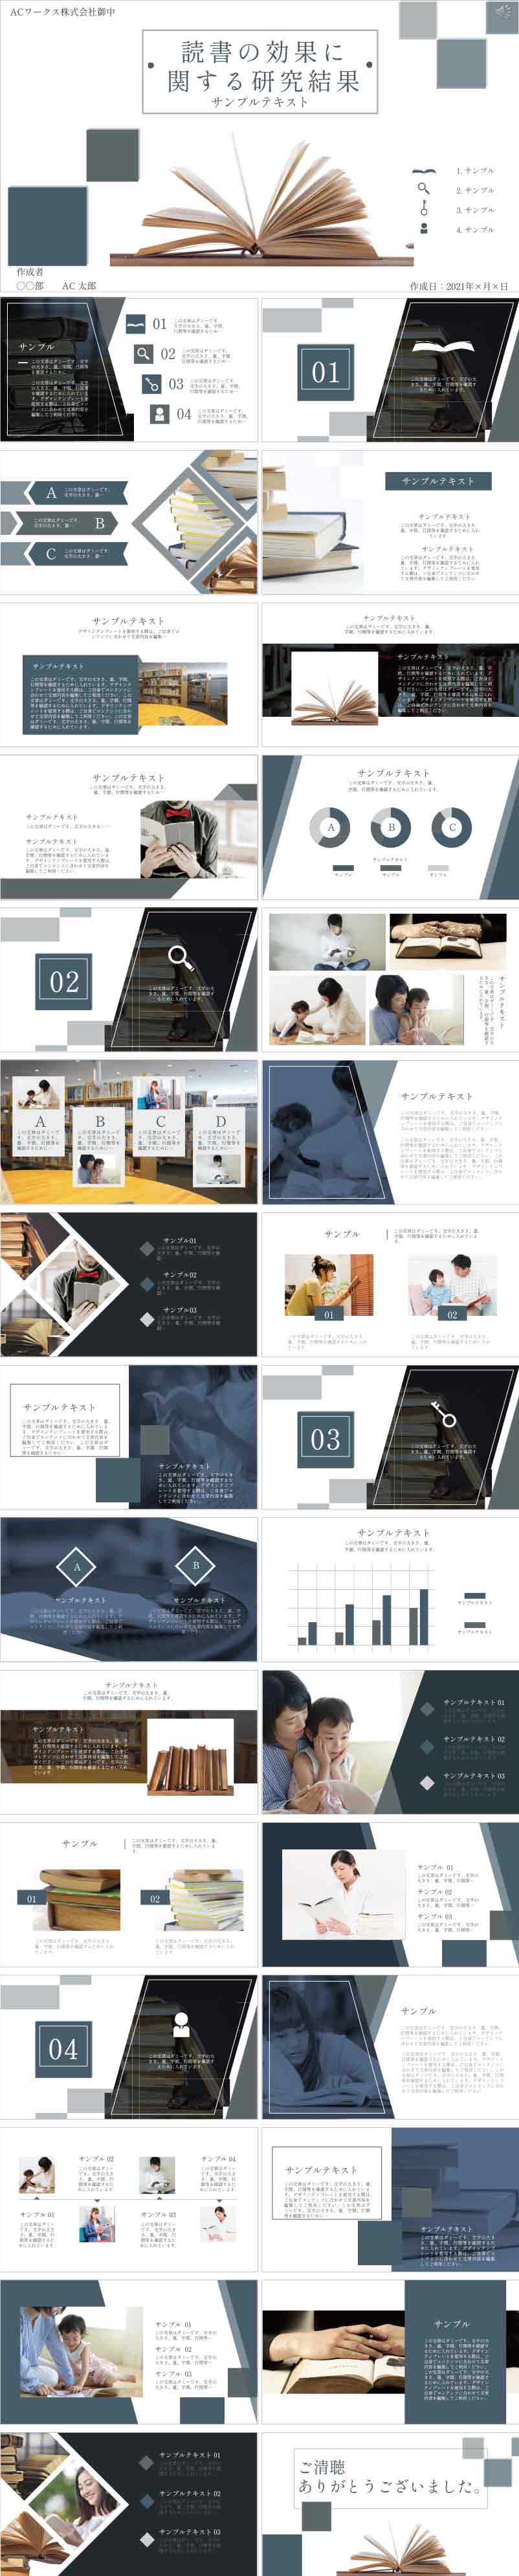 PowerPoint template vol.93